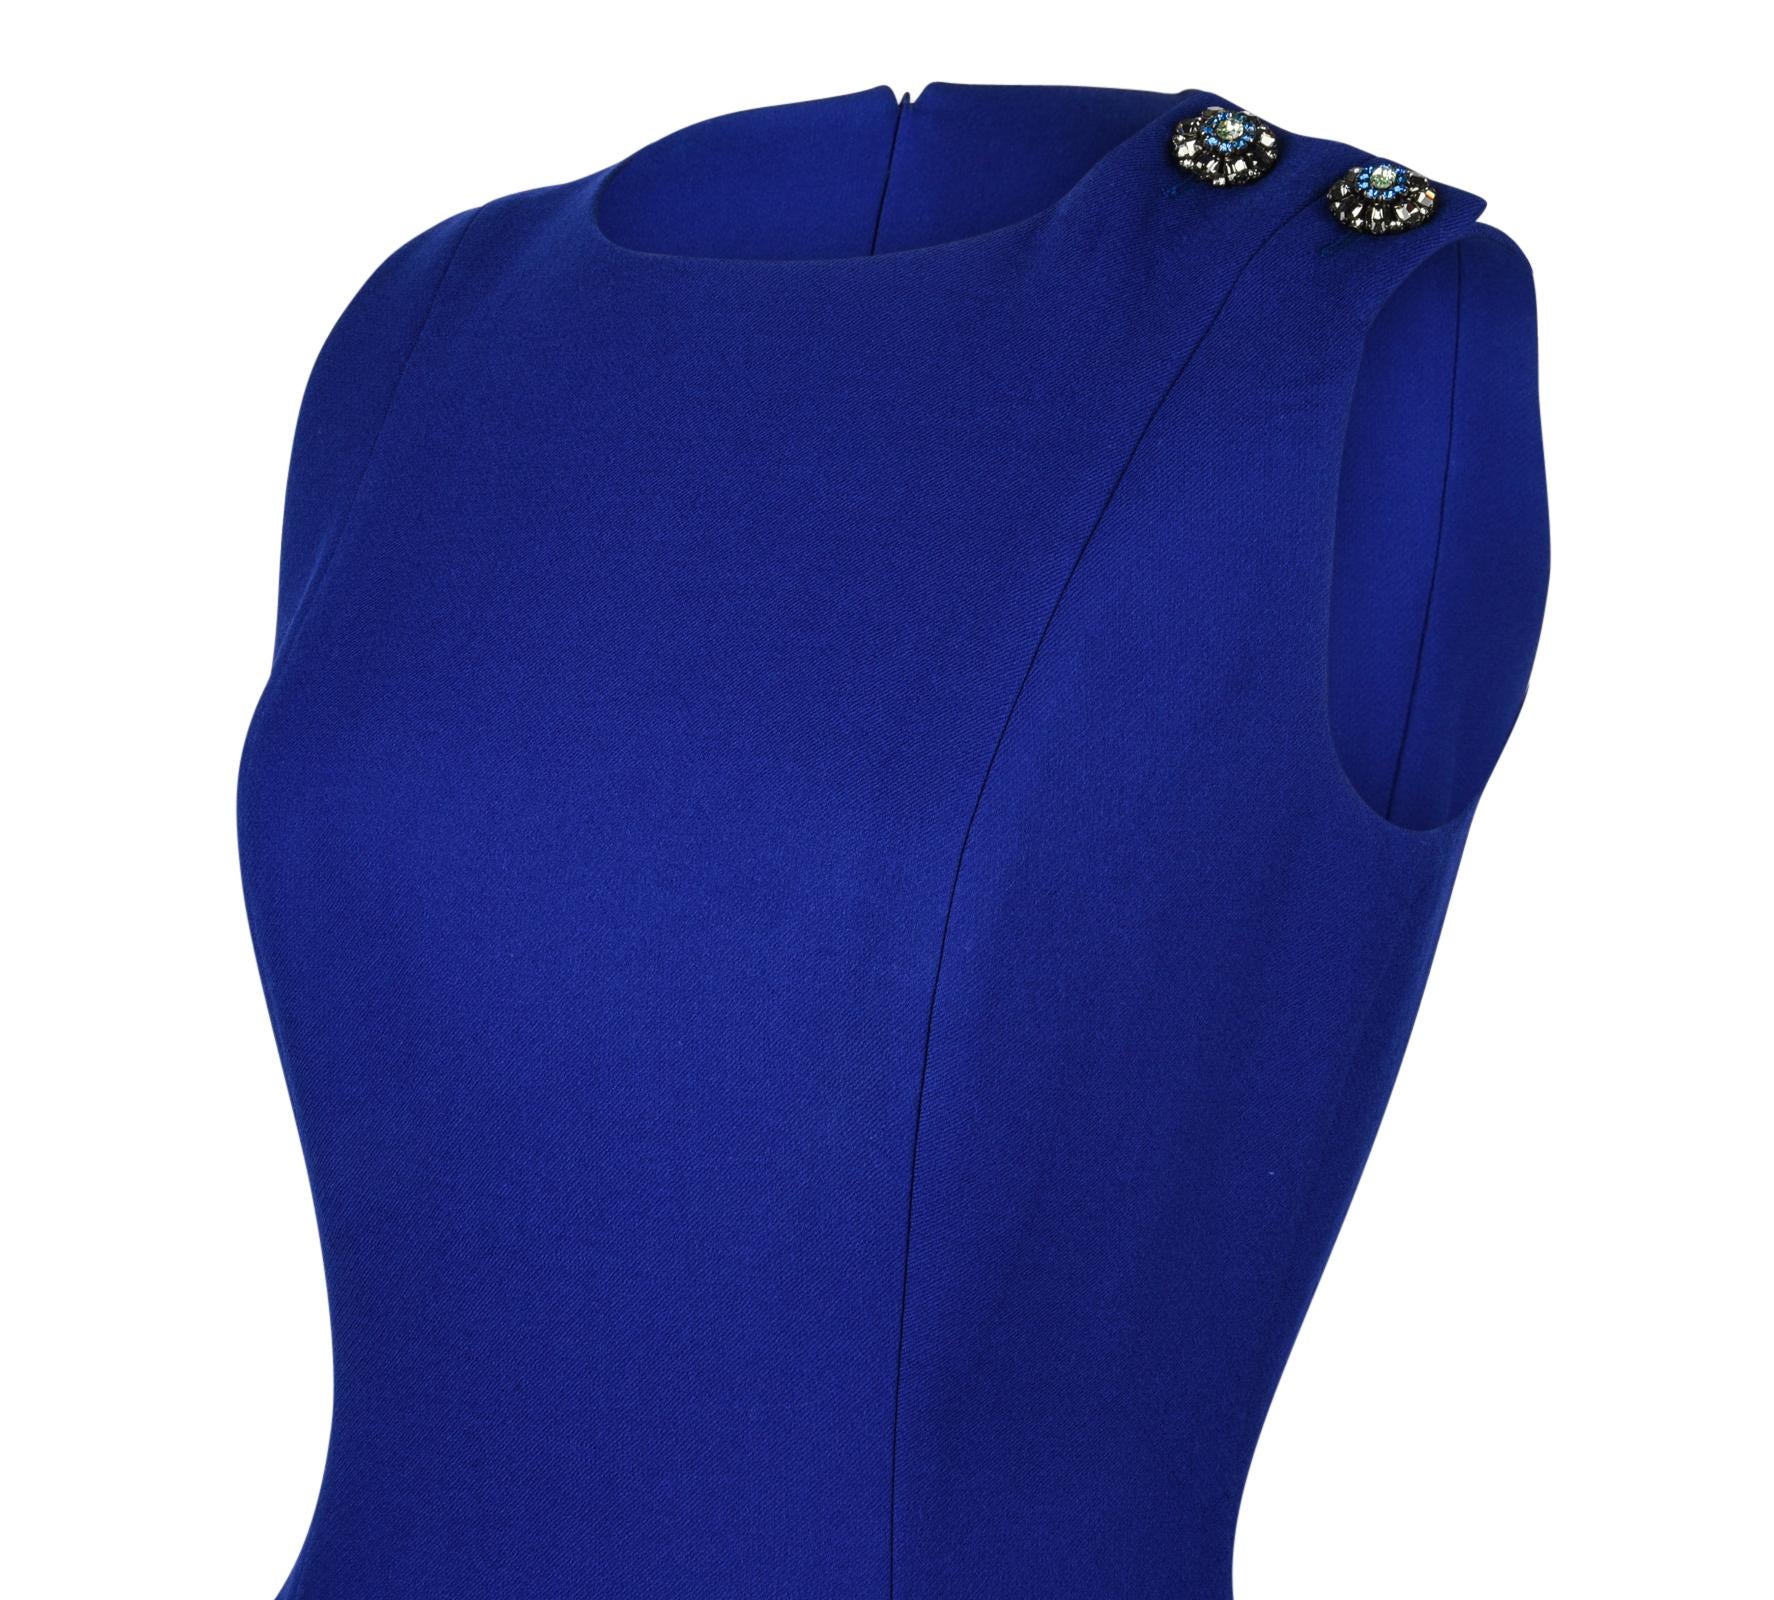 Women's Christian Dior Top Electric Blue Sleeveless Jeweled Shoulder fits 8